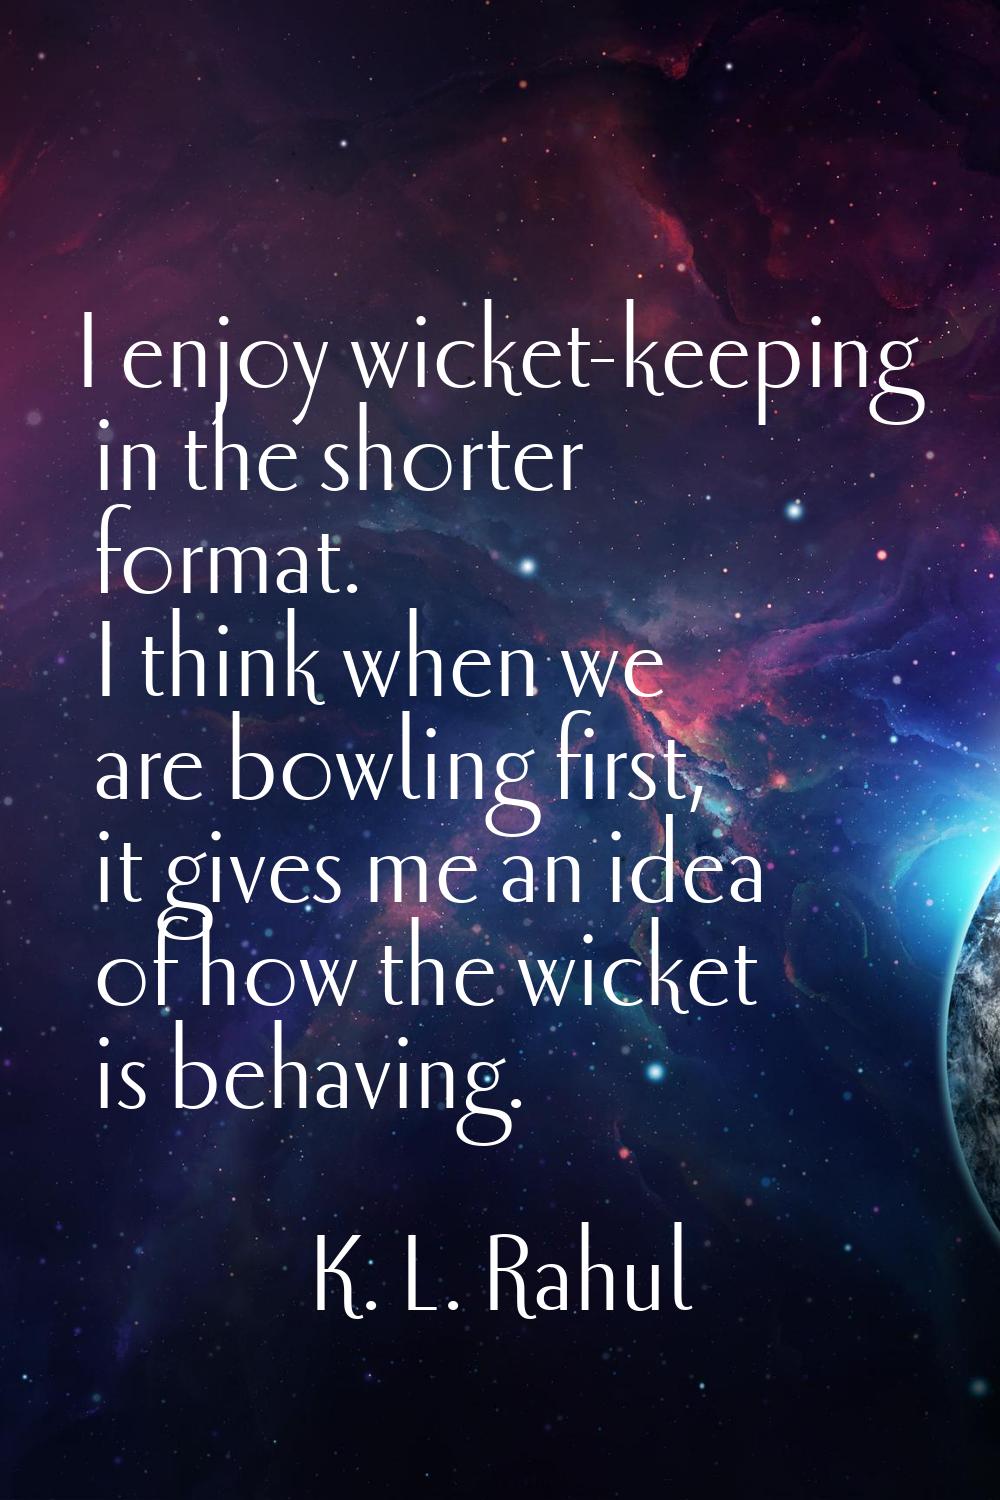 I enjoy wicket-keeping in the shorter format. I think when we are bowling first, it gives me an ide